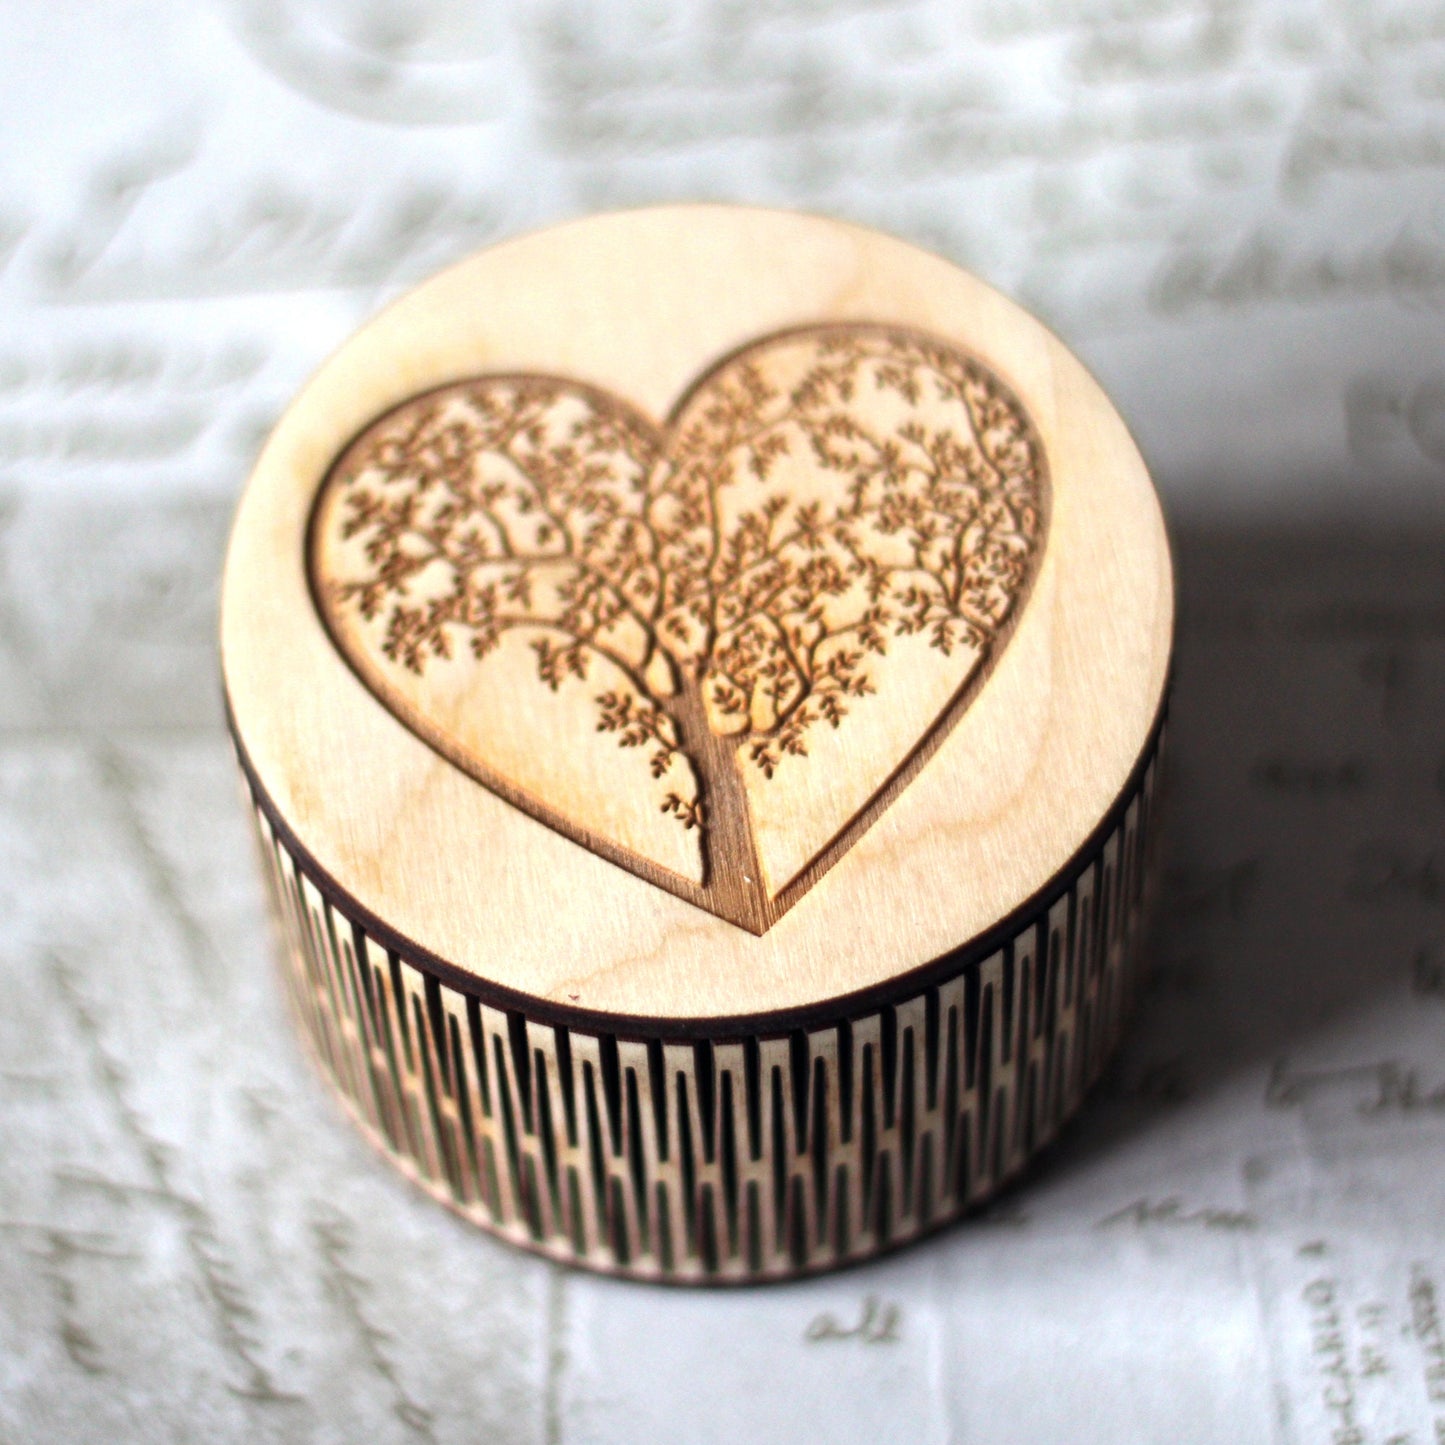 Engraved Wooden Heart trinket box with living hinge. For keepsakes treasures, a lovely Valentine or anniversary gift